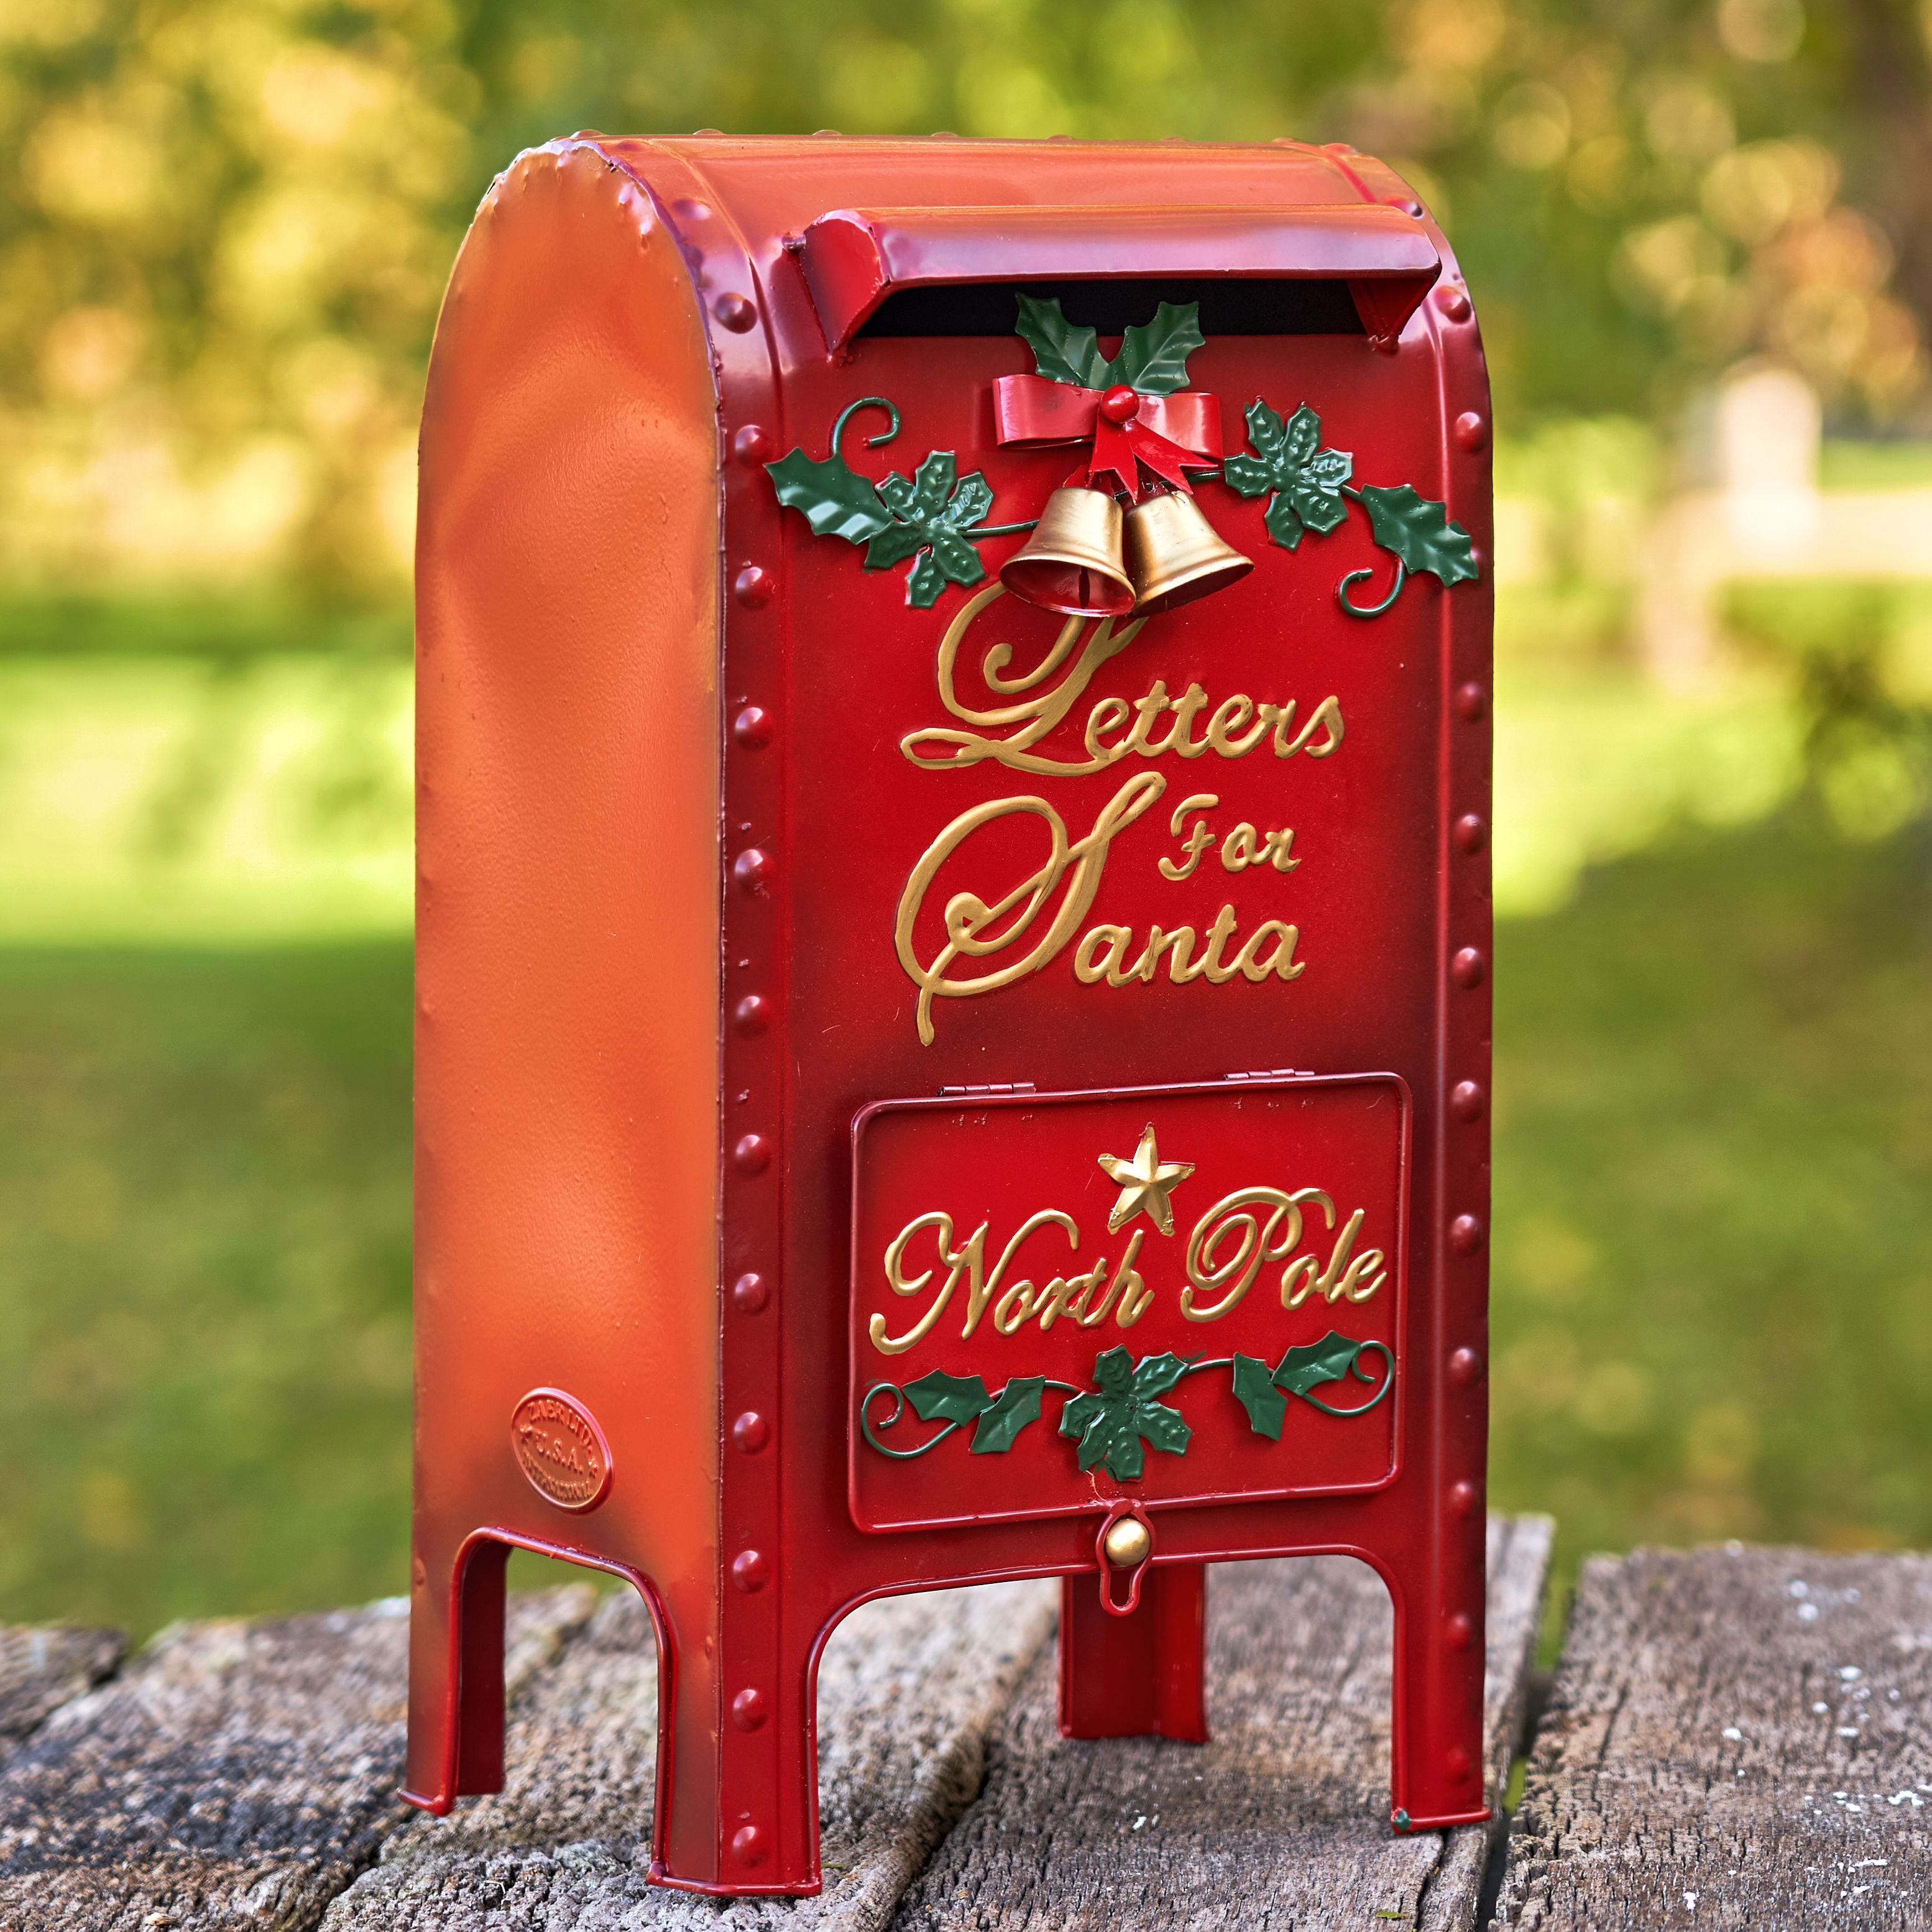 Details about   Panetone Box Santa Claus Pack of 50 